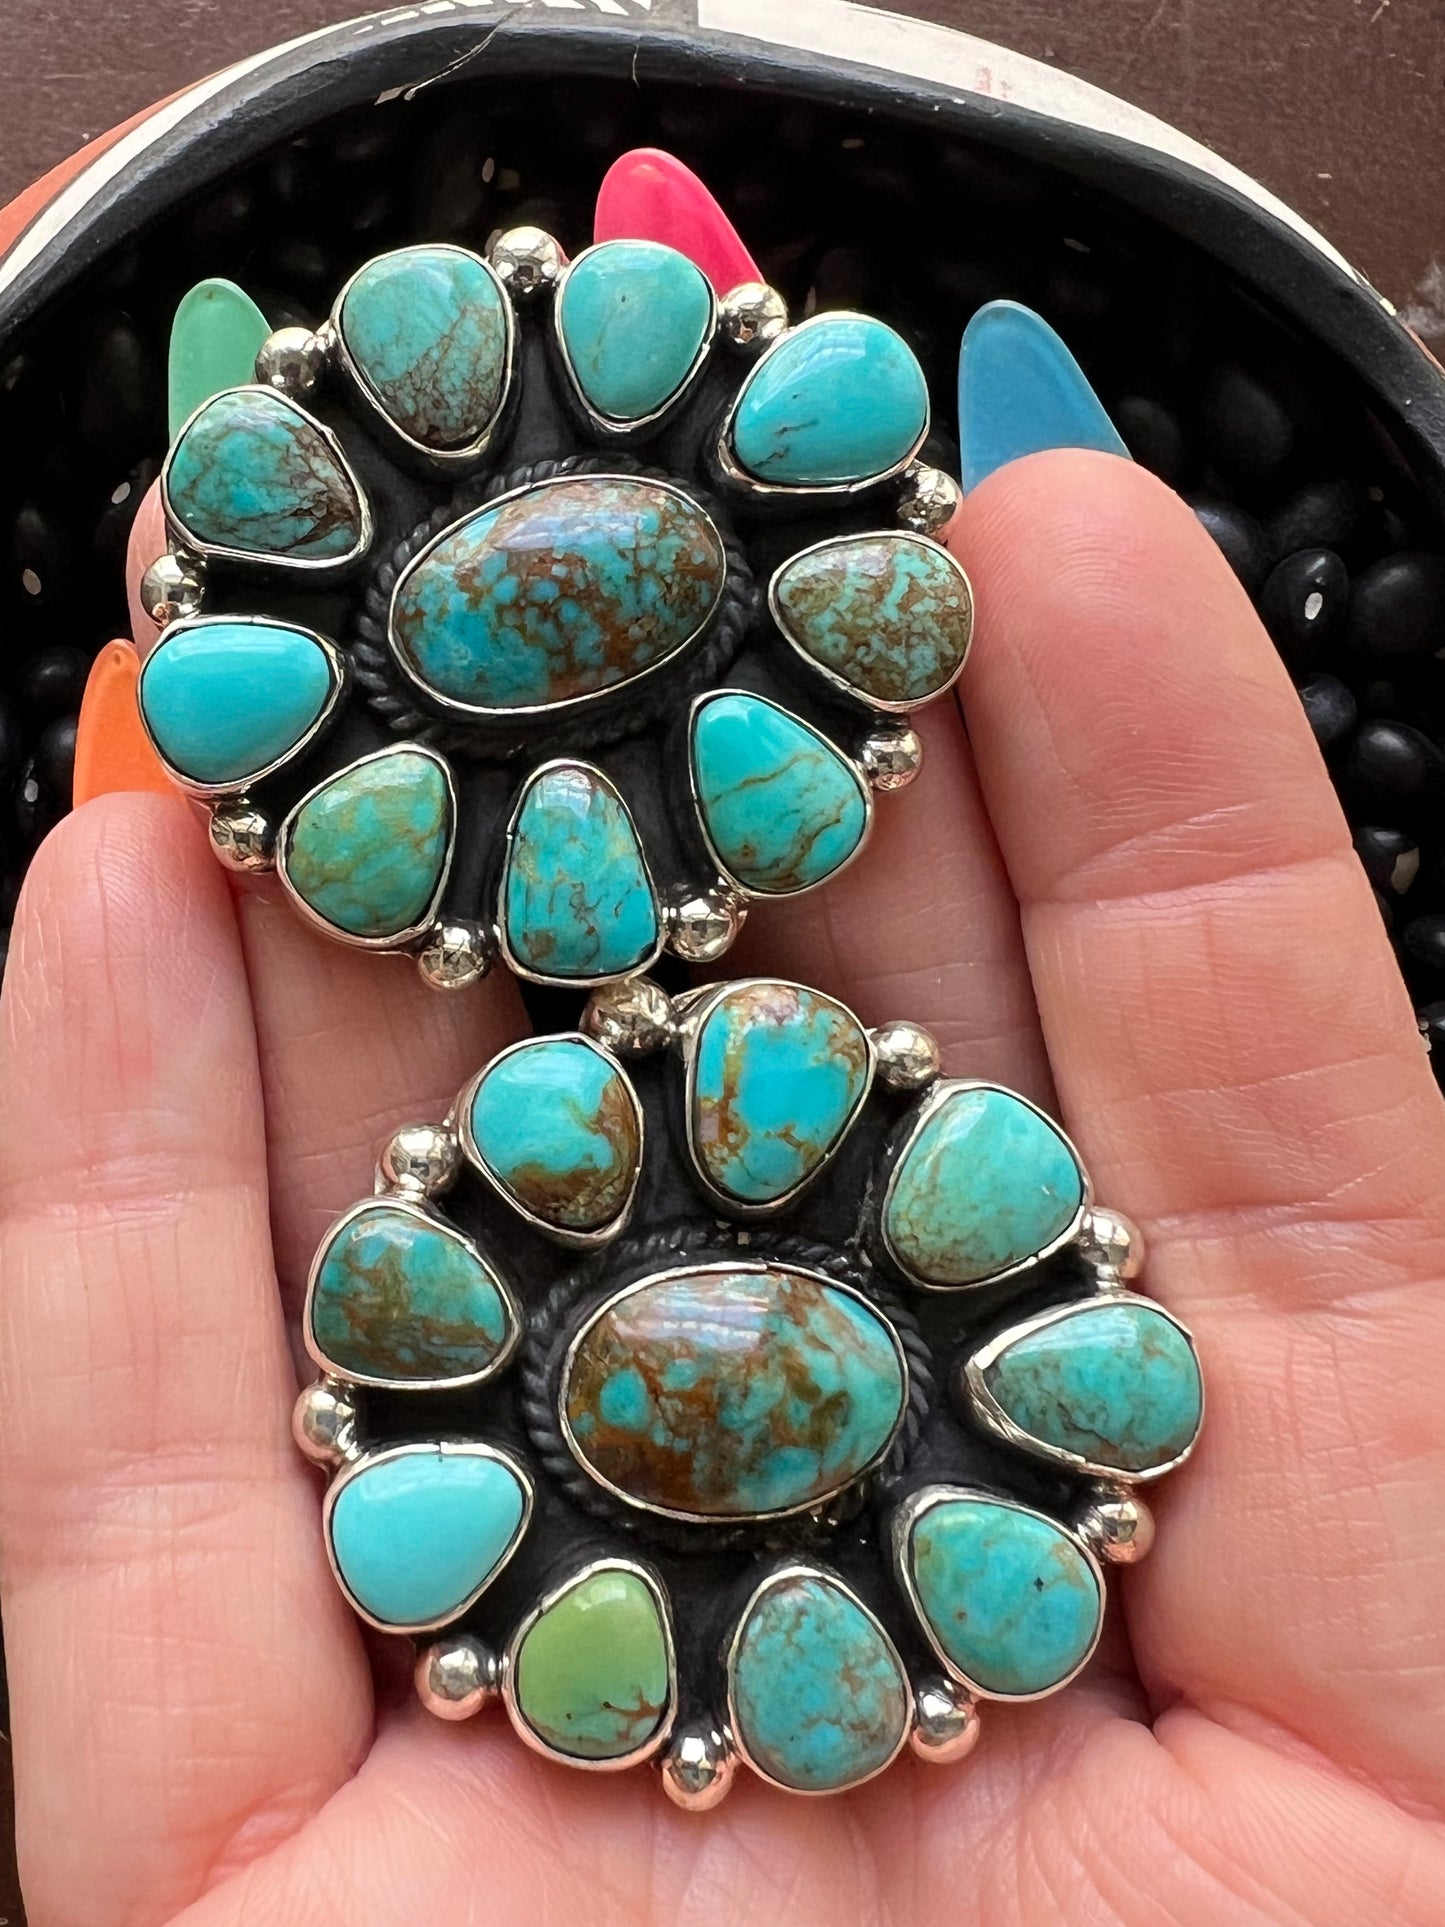 The Tilly Turquoise Cluster Ring